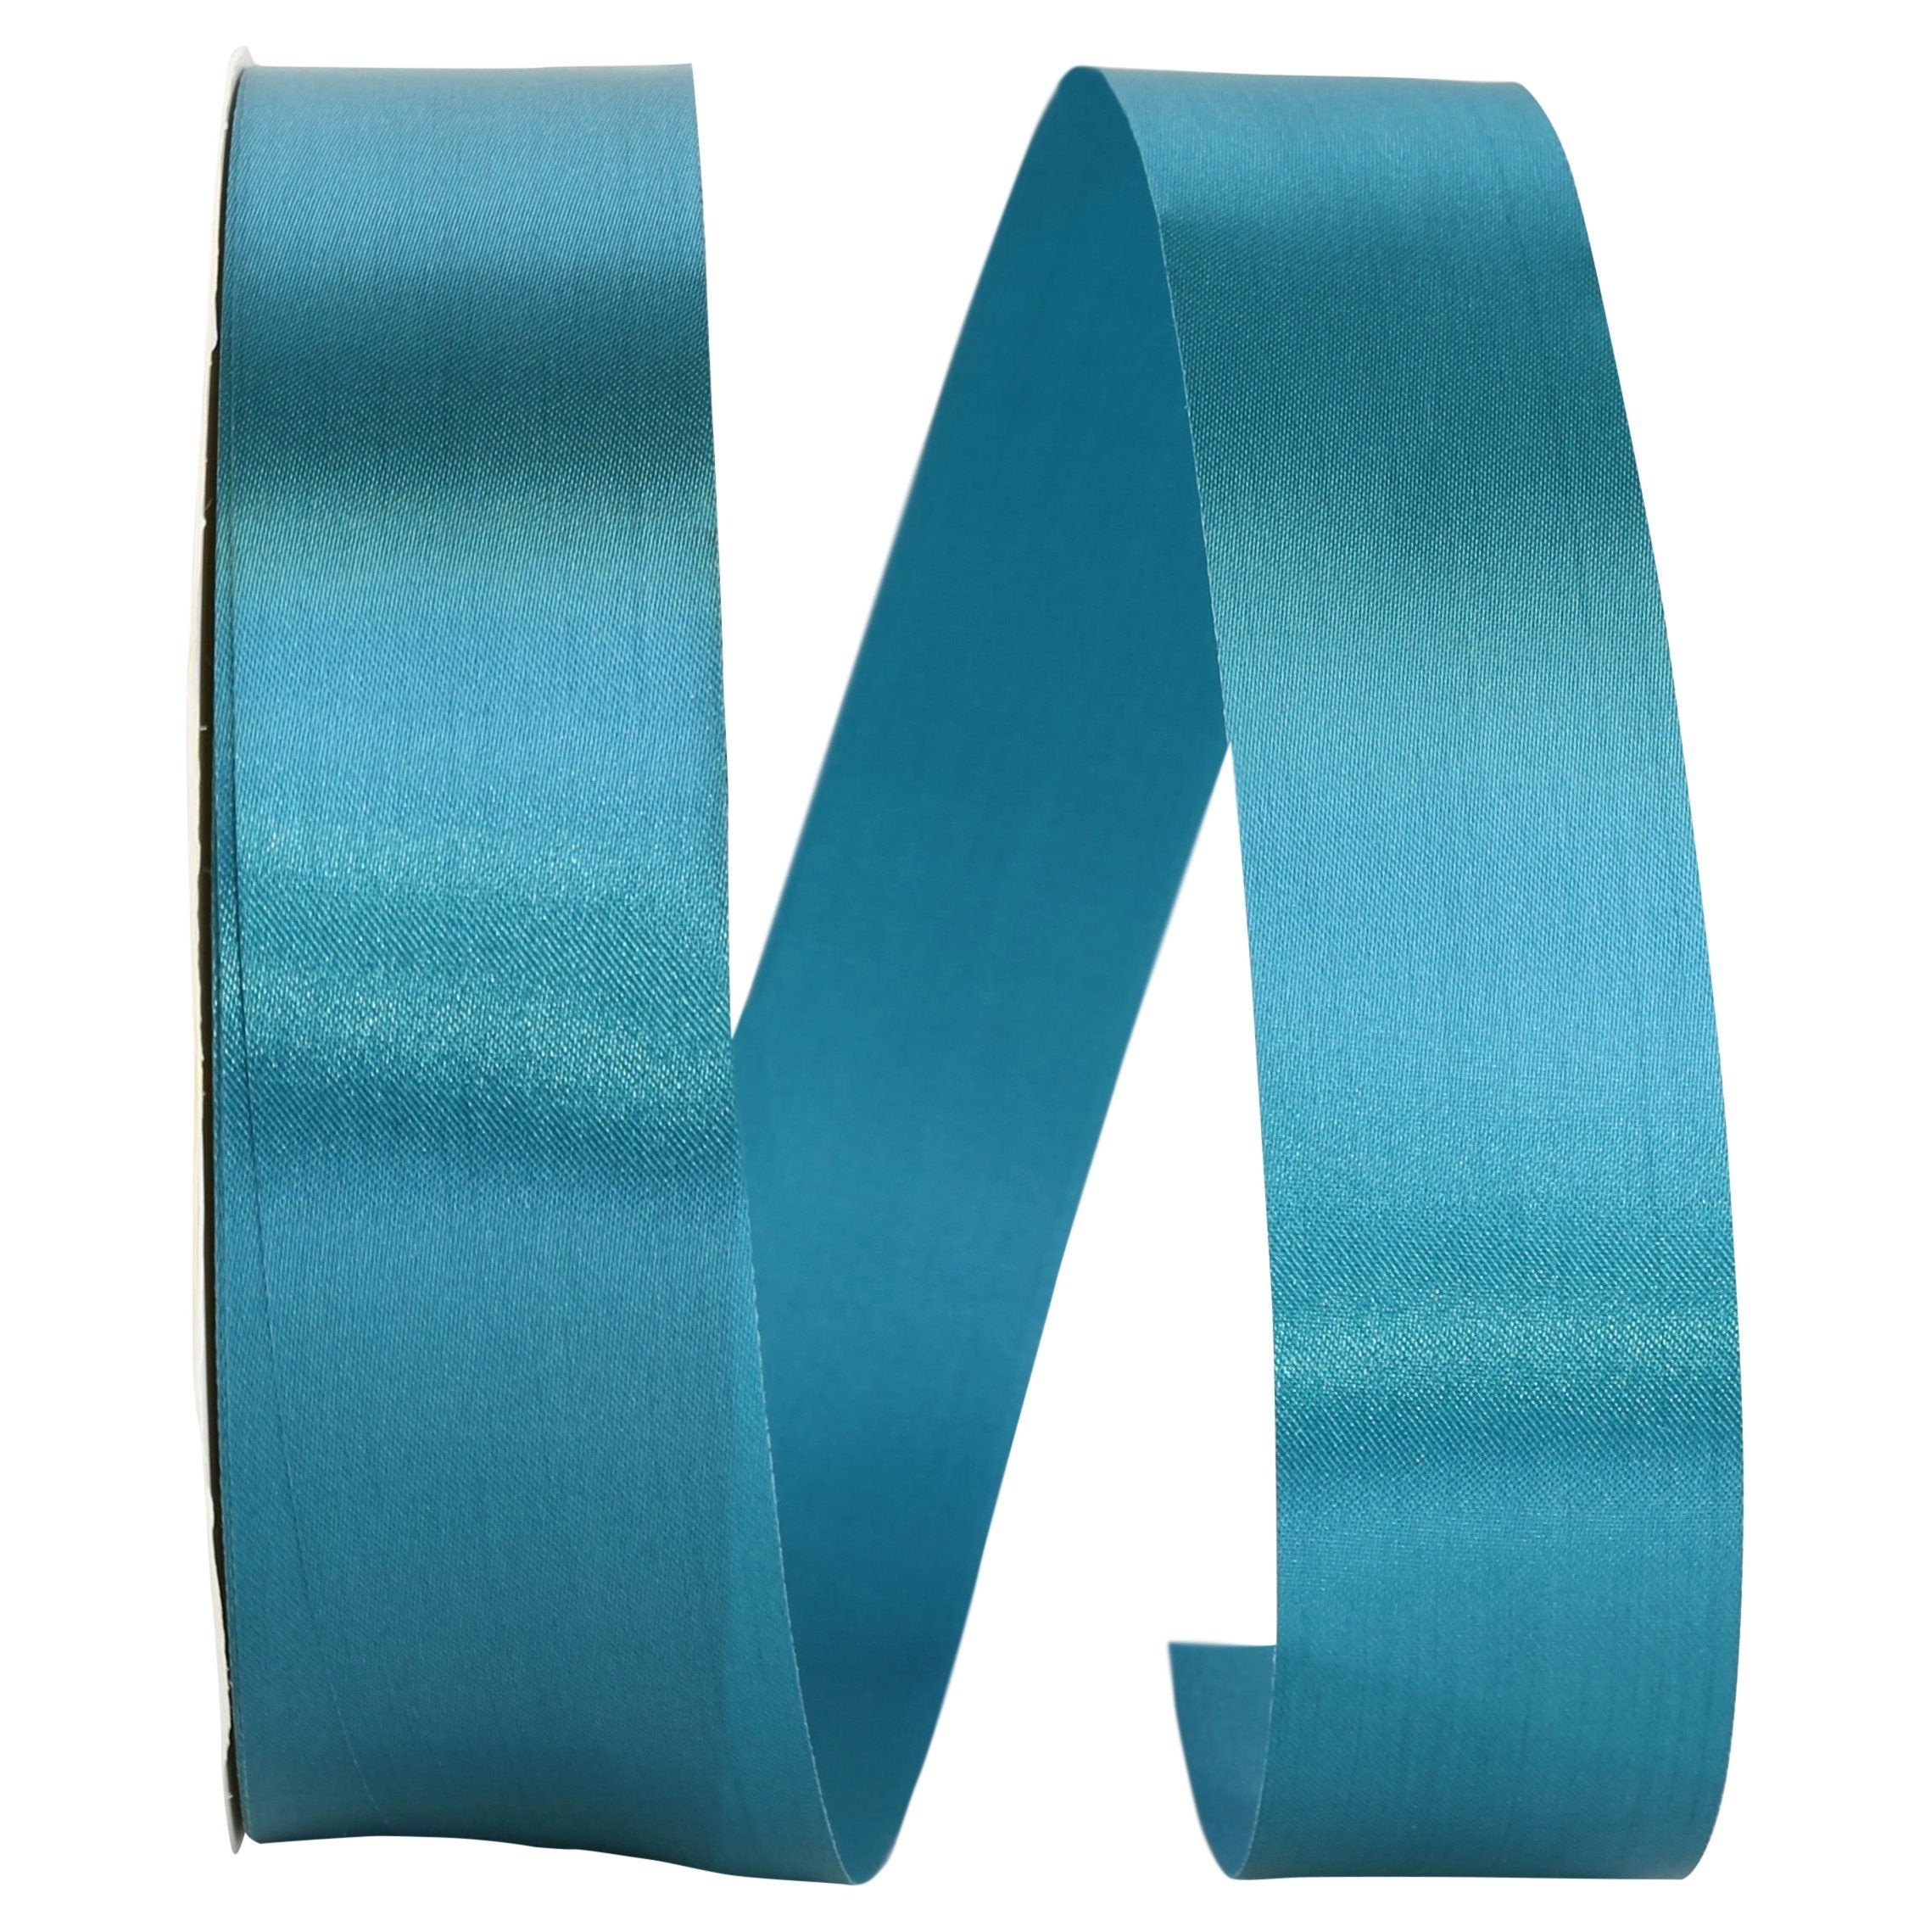 Ocean Blue Allure 1 3/8 inch x 100 Yards Satin Ribbon - by Jam Paper